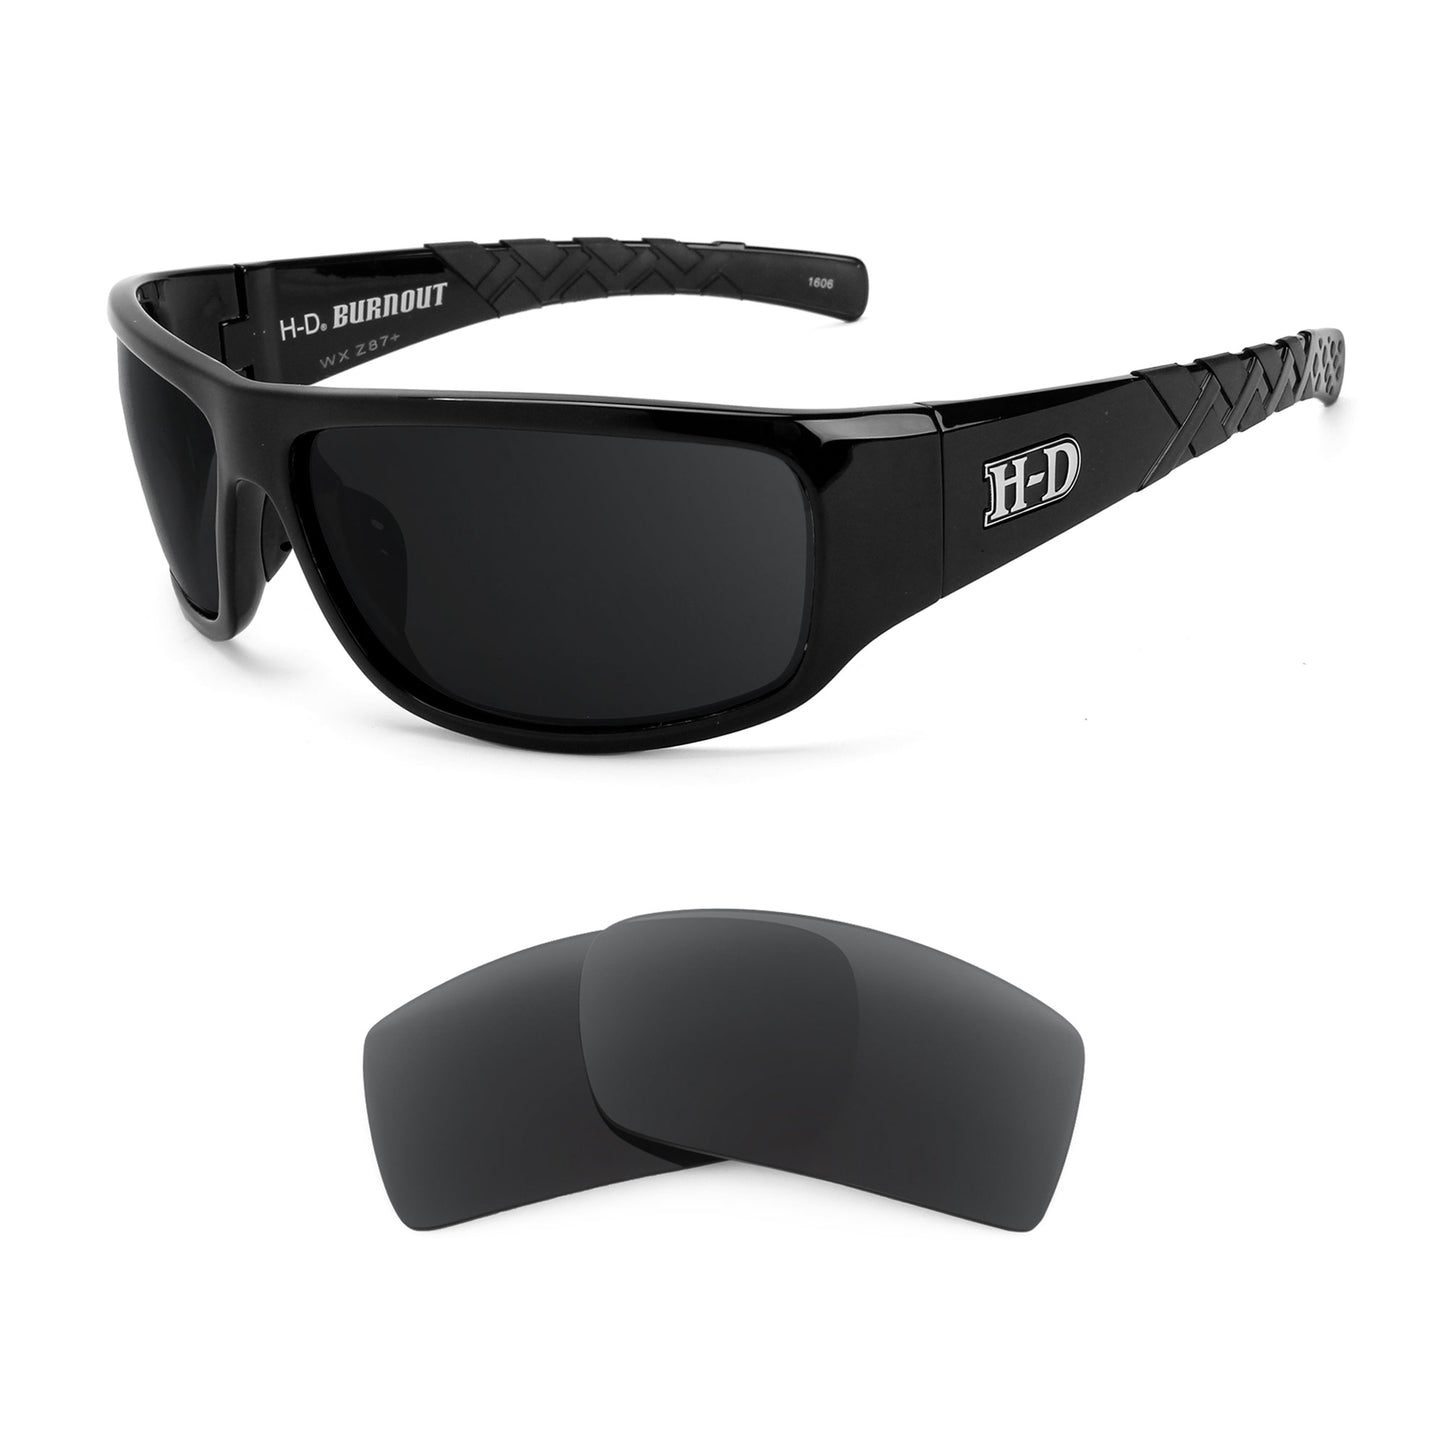 Harley Davidson Burnout sunglasses with replacement lenses